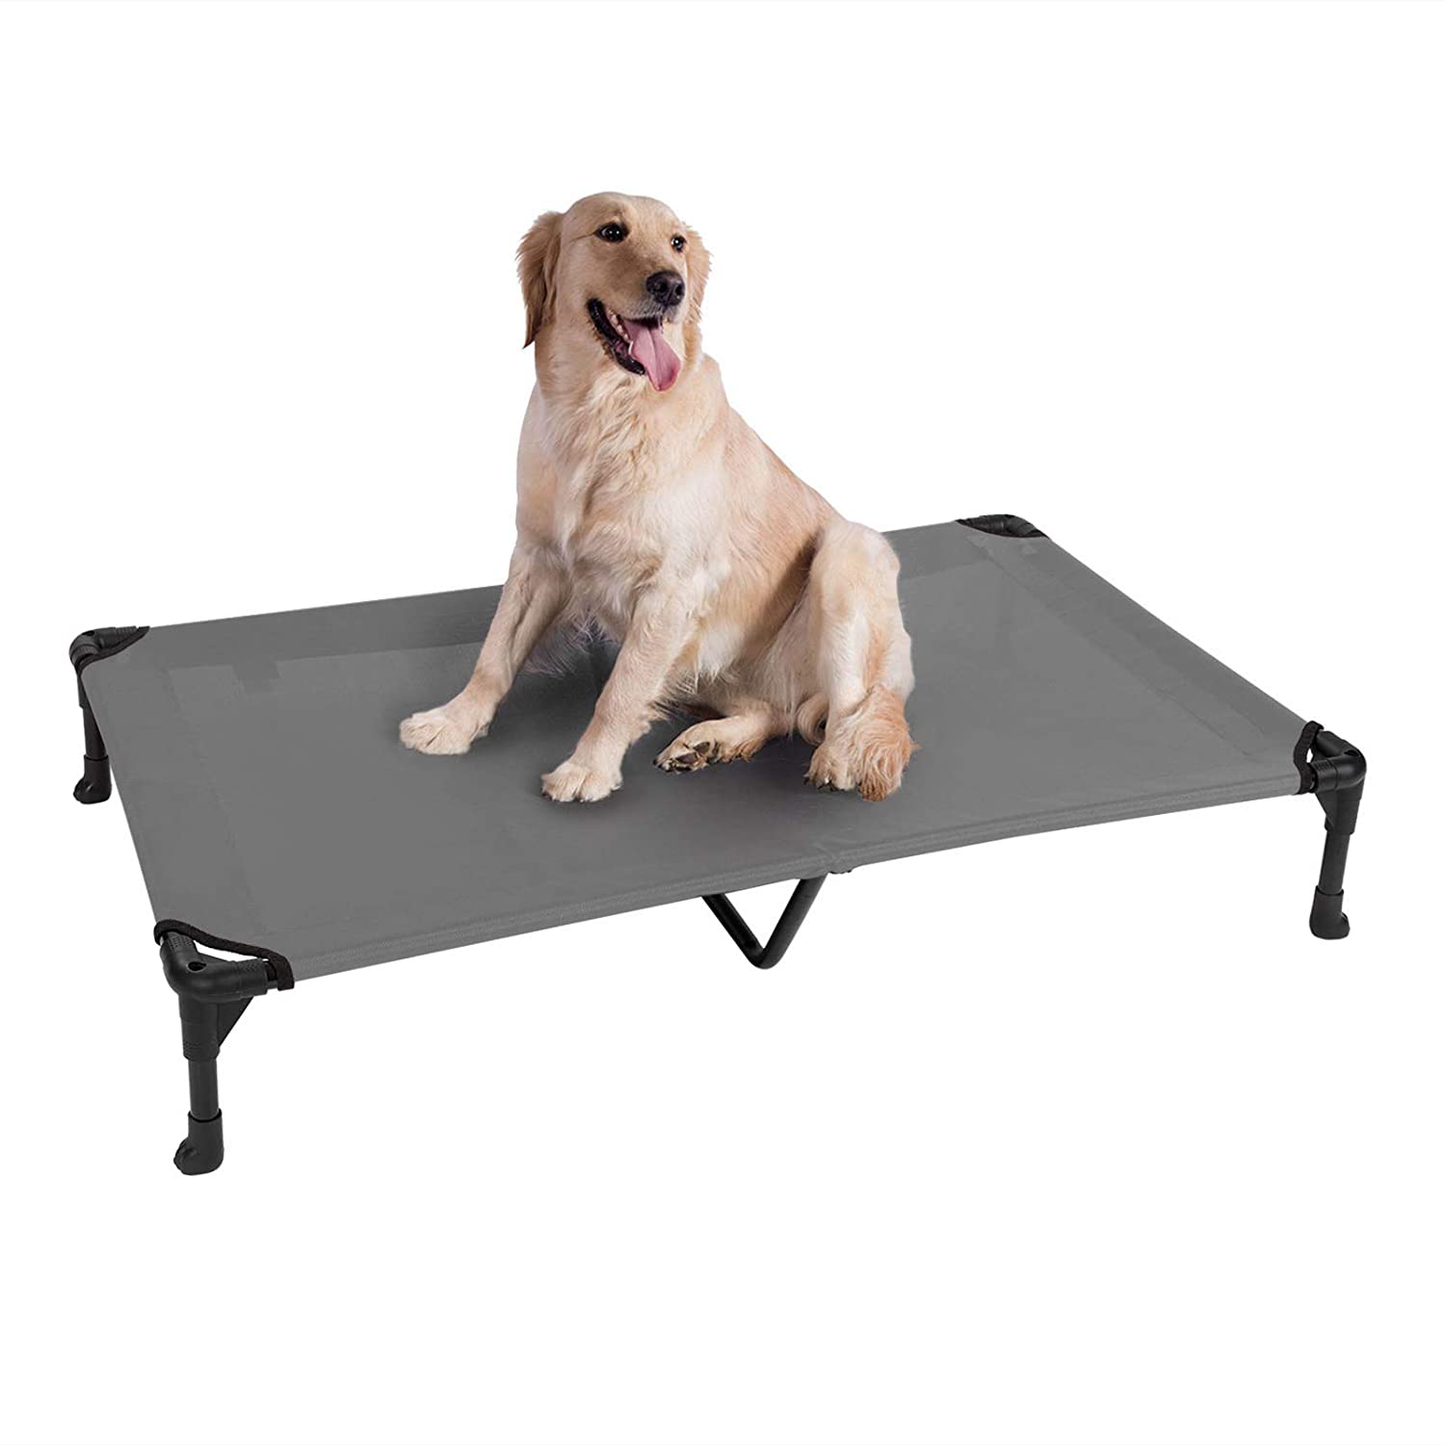 Veehoo Cooling Elevated Dog Bed, Portable Raised Pet Cot with Washable & Breathable Mesh, No-Slip Rubber Feet for Indoor & Outdoor Use, X Large, Silver Gray Animals & Pet Supplies > Pet Supplies > Dog Supplies > Dog Beds Veehoo Silver Gray-Mesh X-Large 